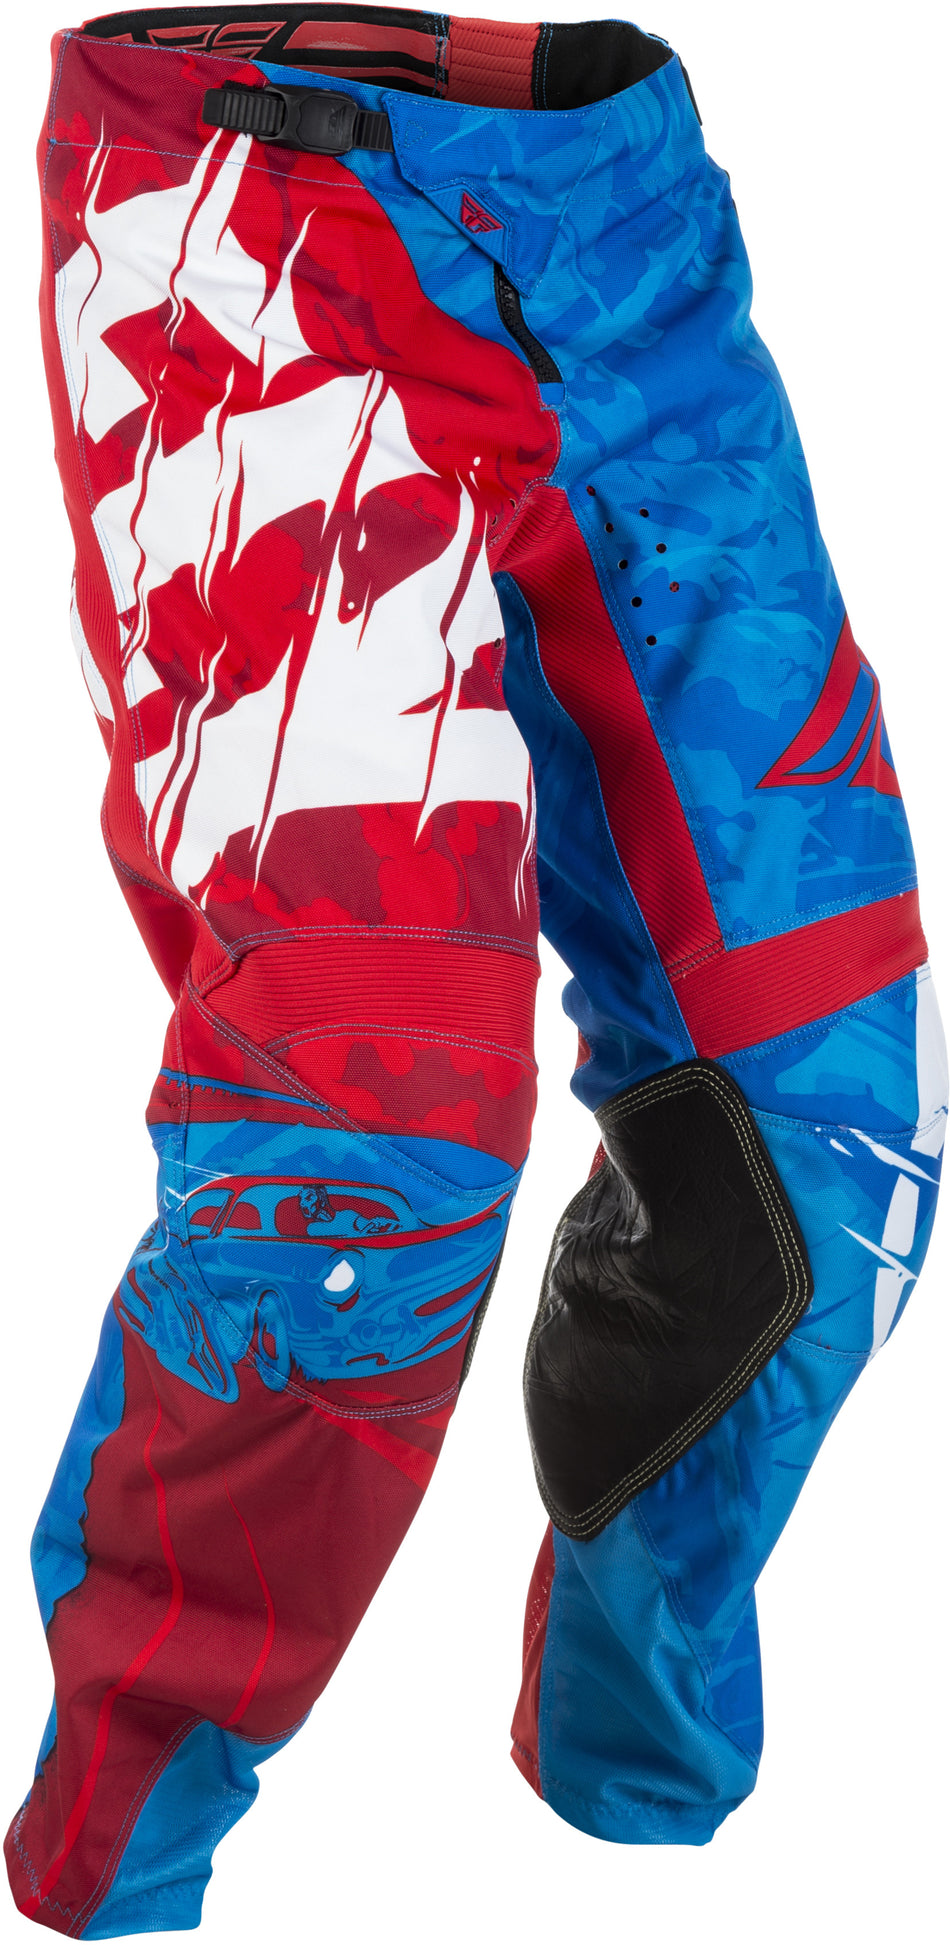 FLY RACING Kinetic Outlaw Pants Red/Blue Sz 36 371-53236